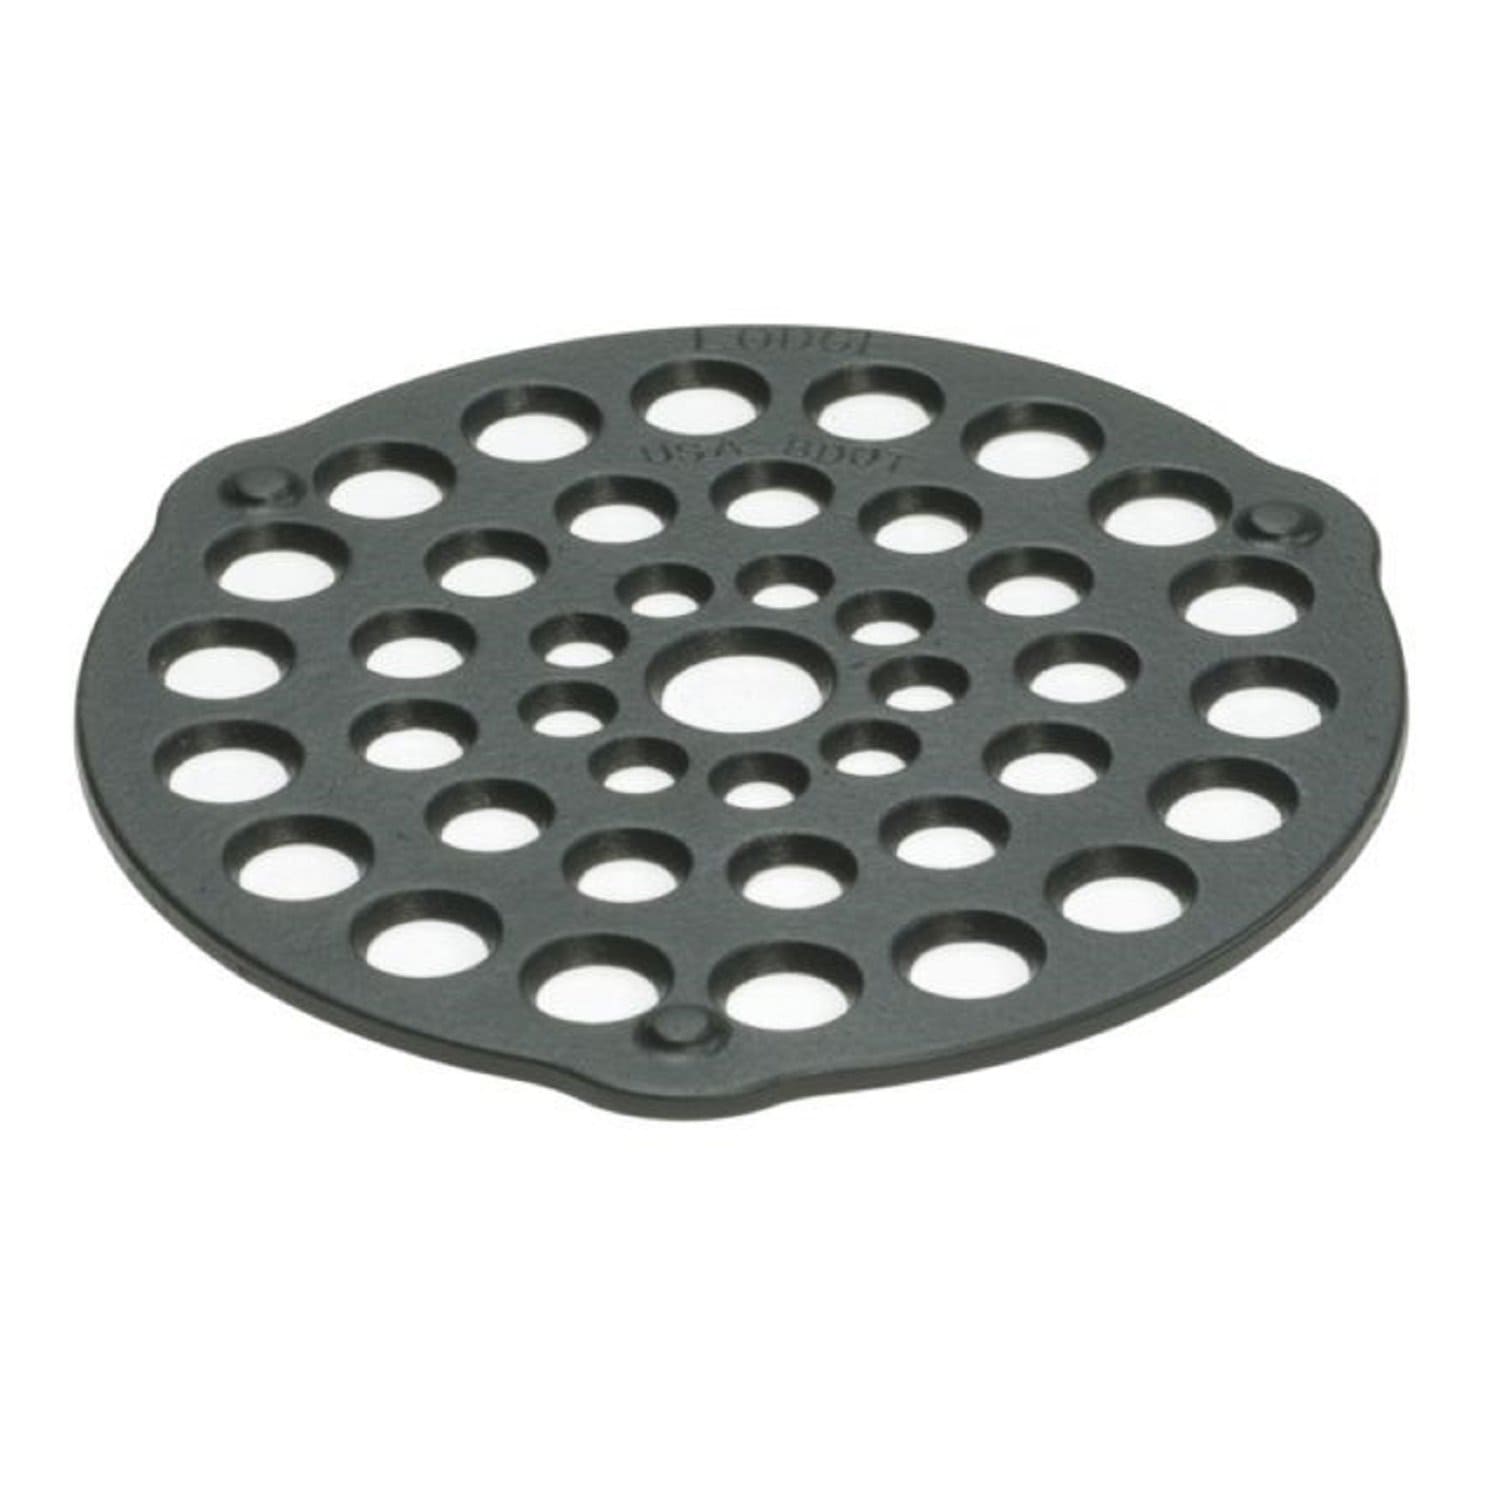 Lodge Cast Iron Camping & Outdoor : Cooking Lodge 8in Cast Iron Meat Rack/Trivet Pre-Seasoned